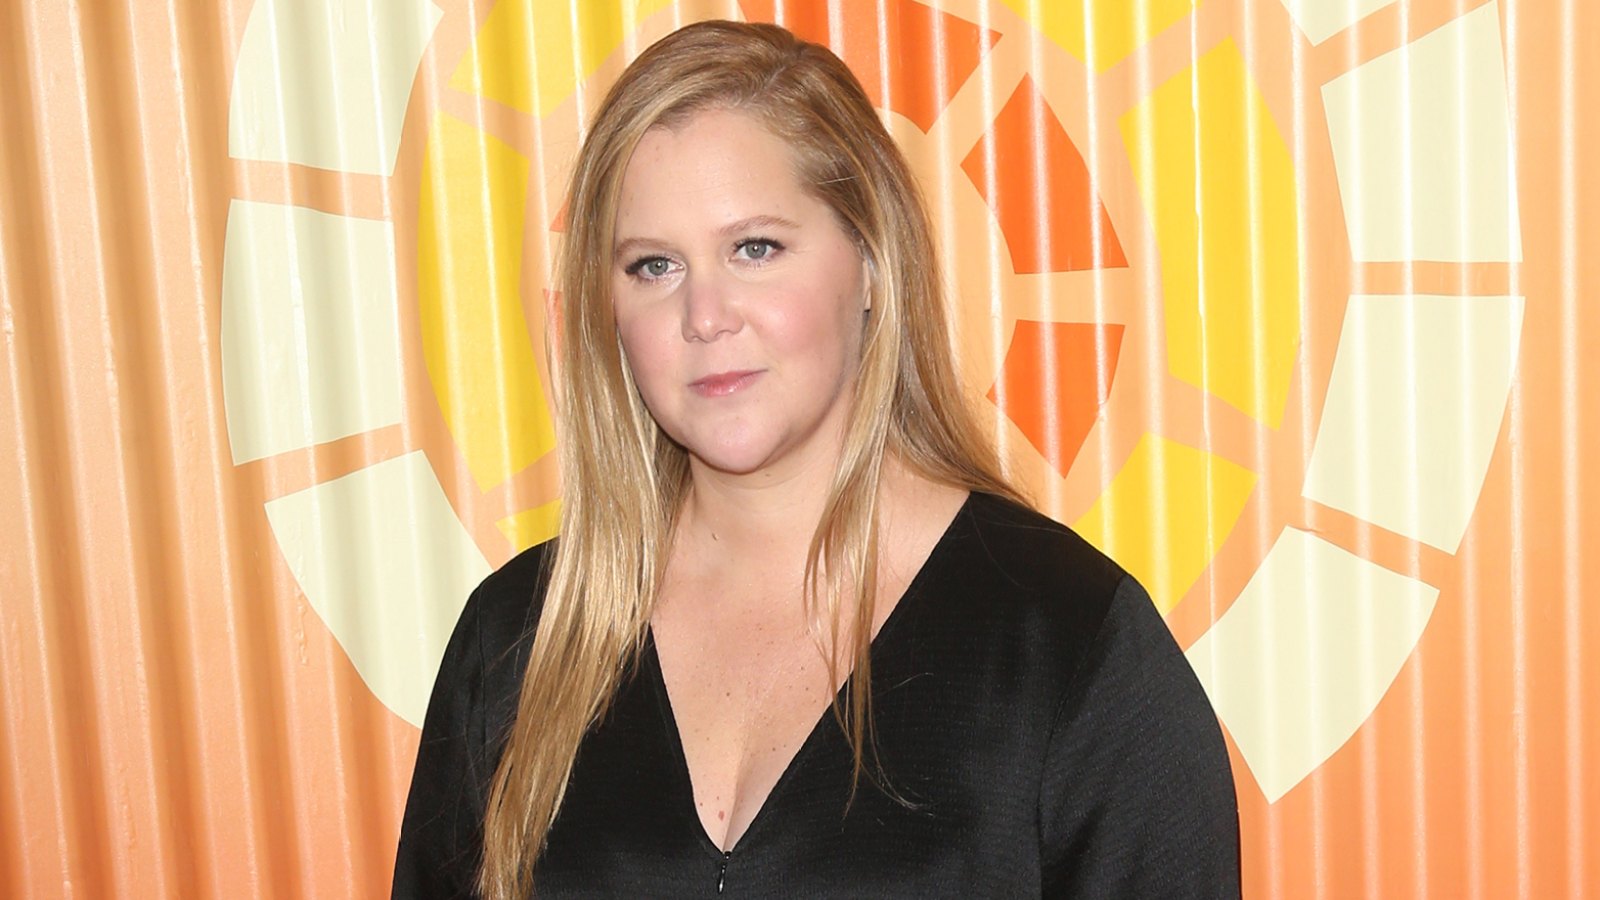 Amy Schumer says uterus removal surgery healed her "lifelong pain."